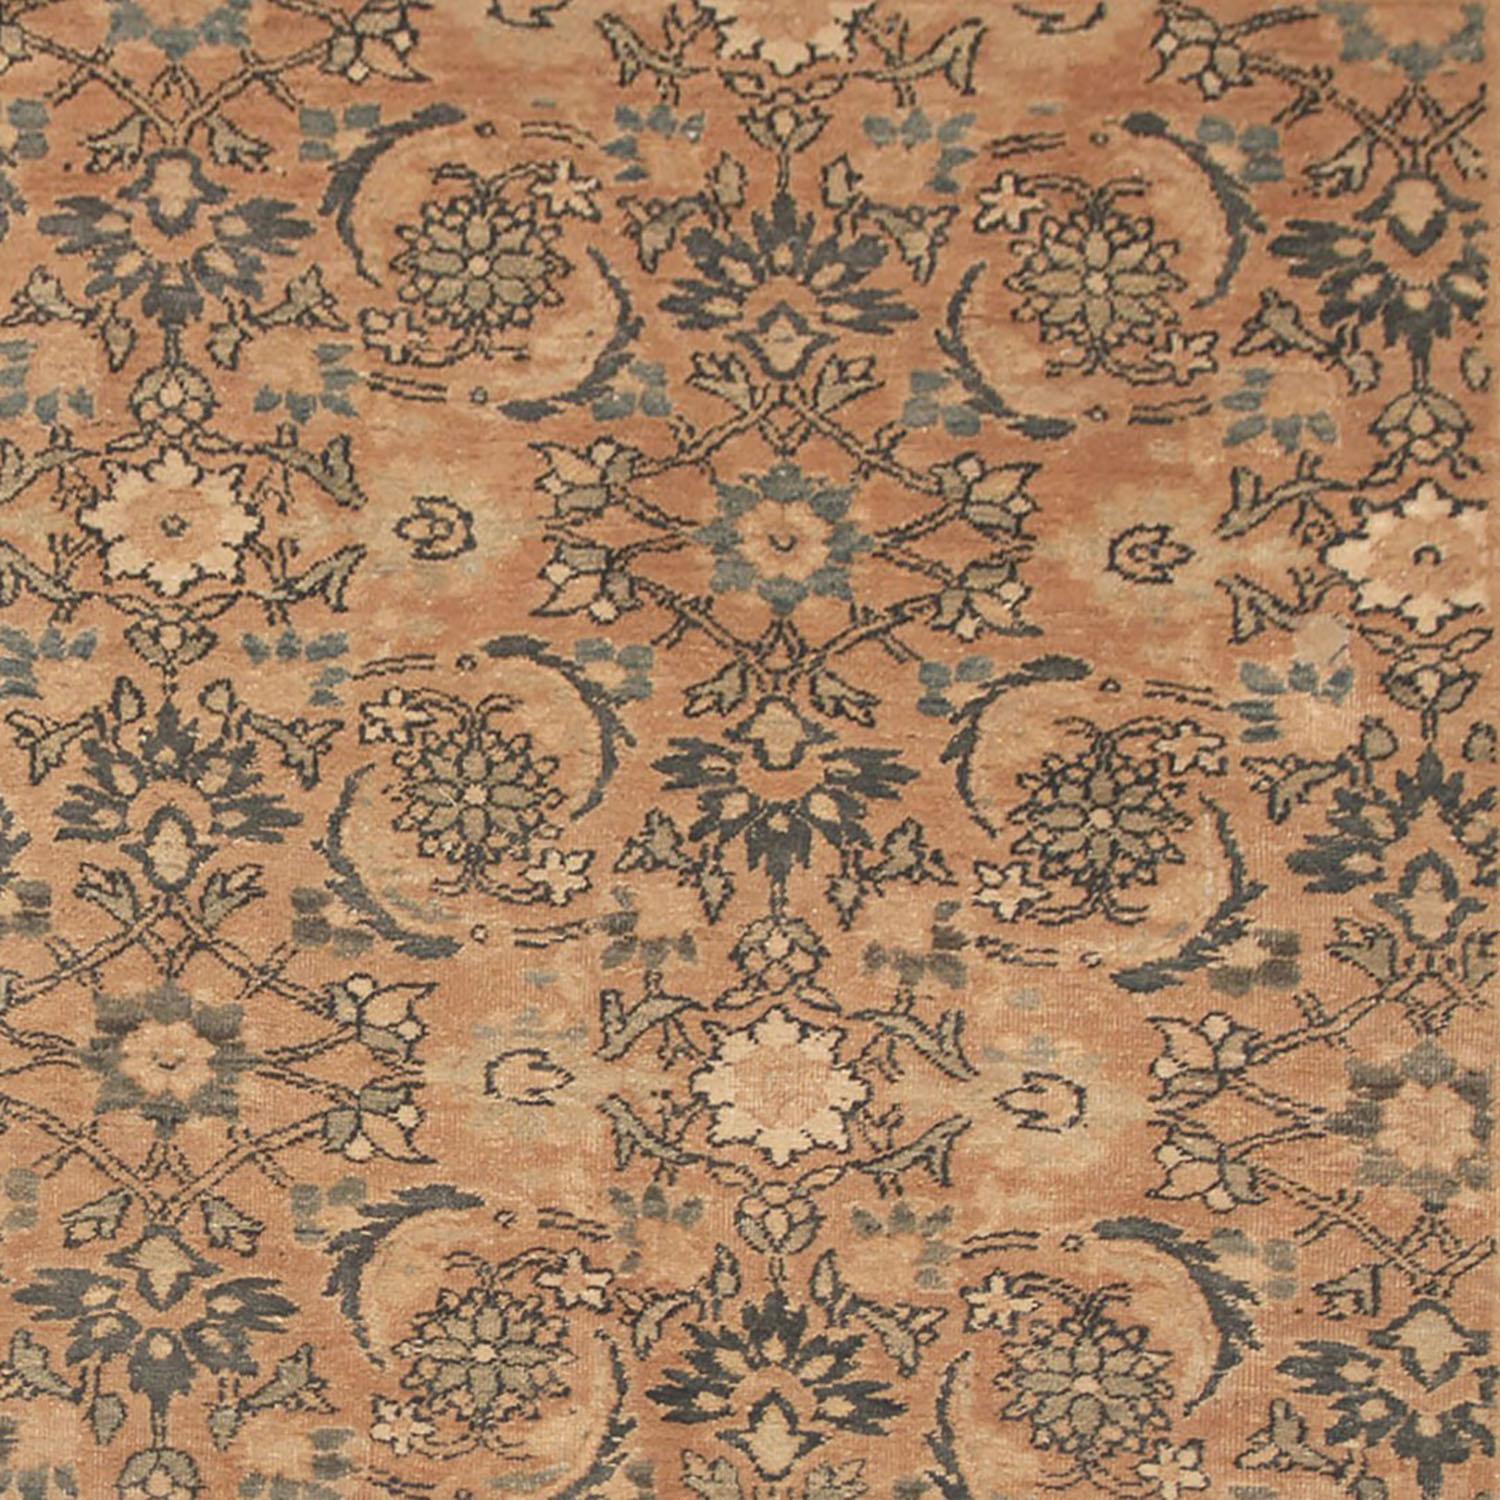 Hand knotted 10x15 beige & brown rug.